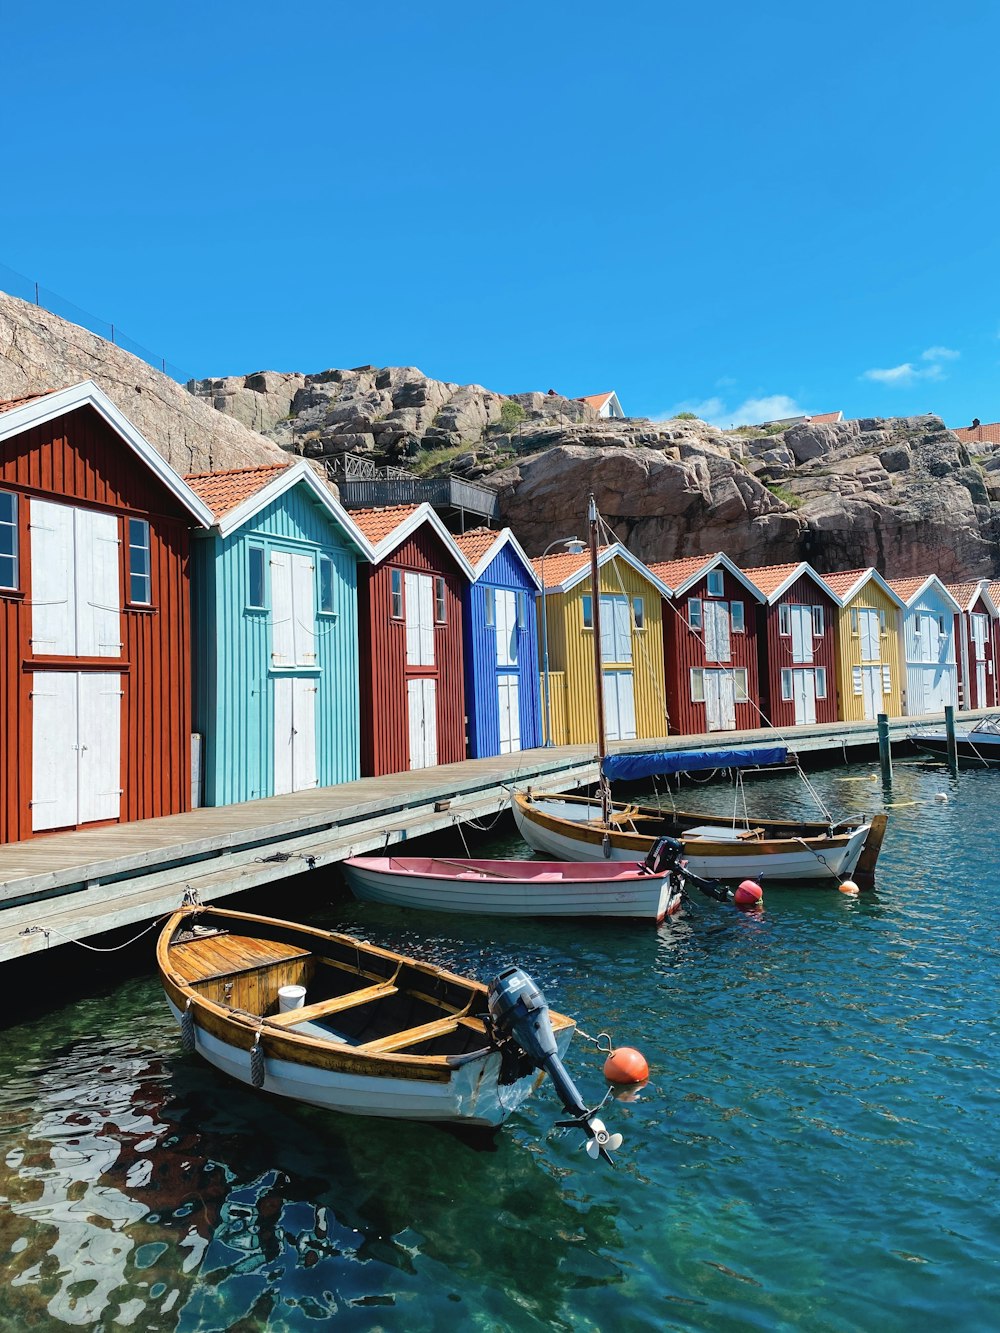 a row of colorful beach huts sitting next to a body of water